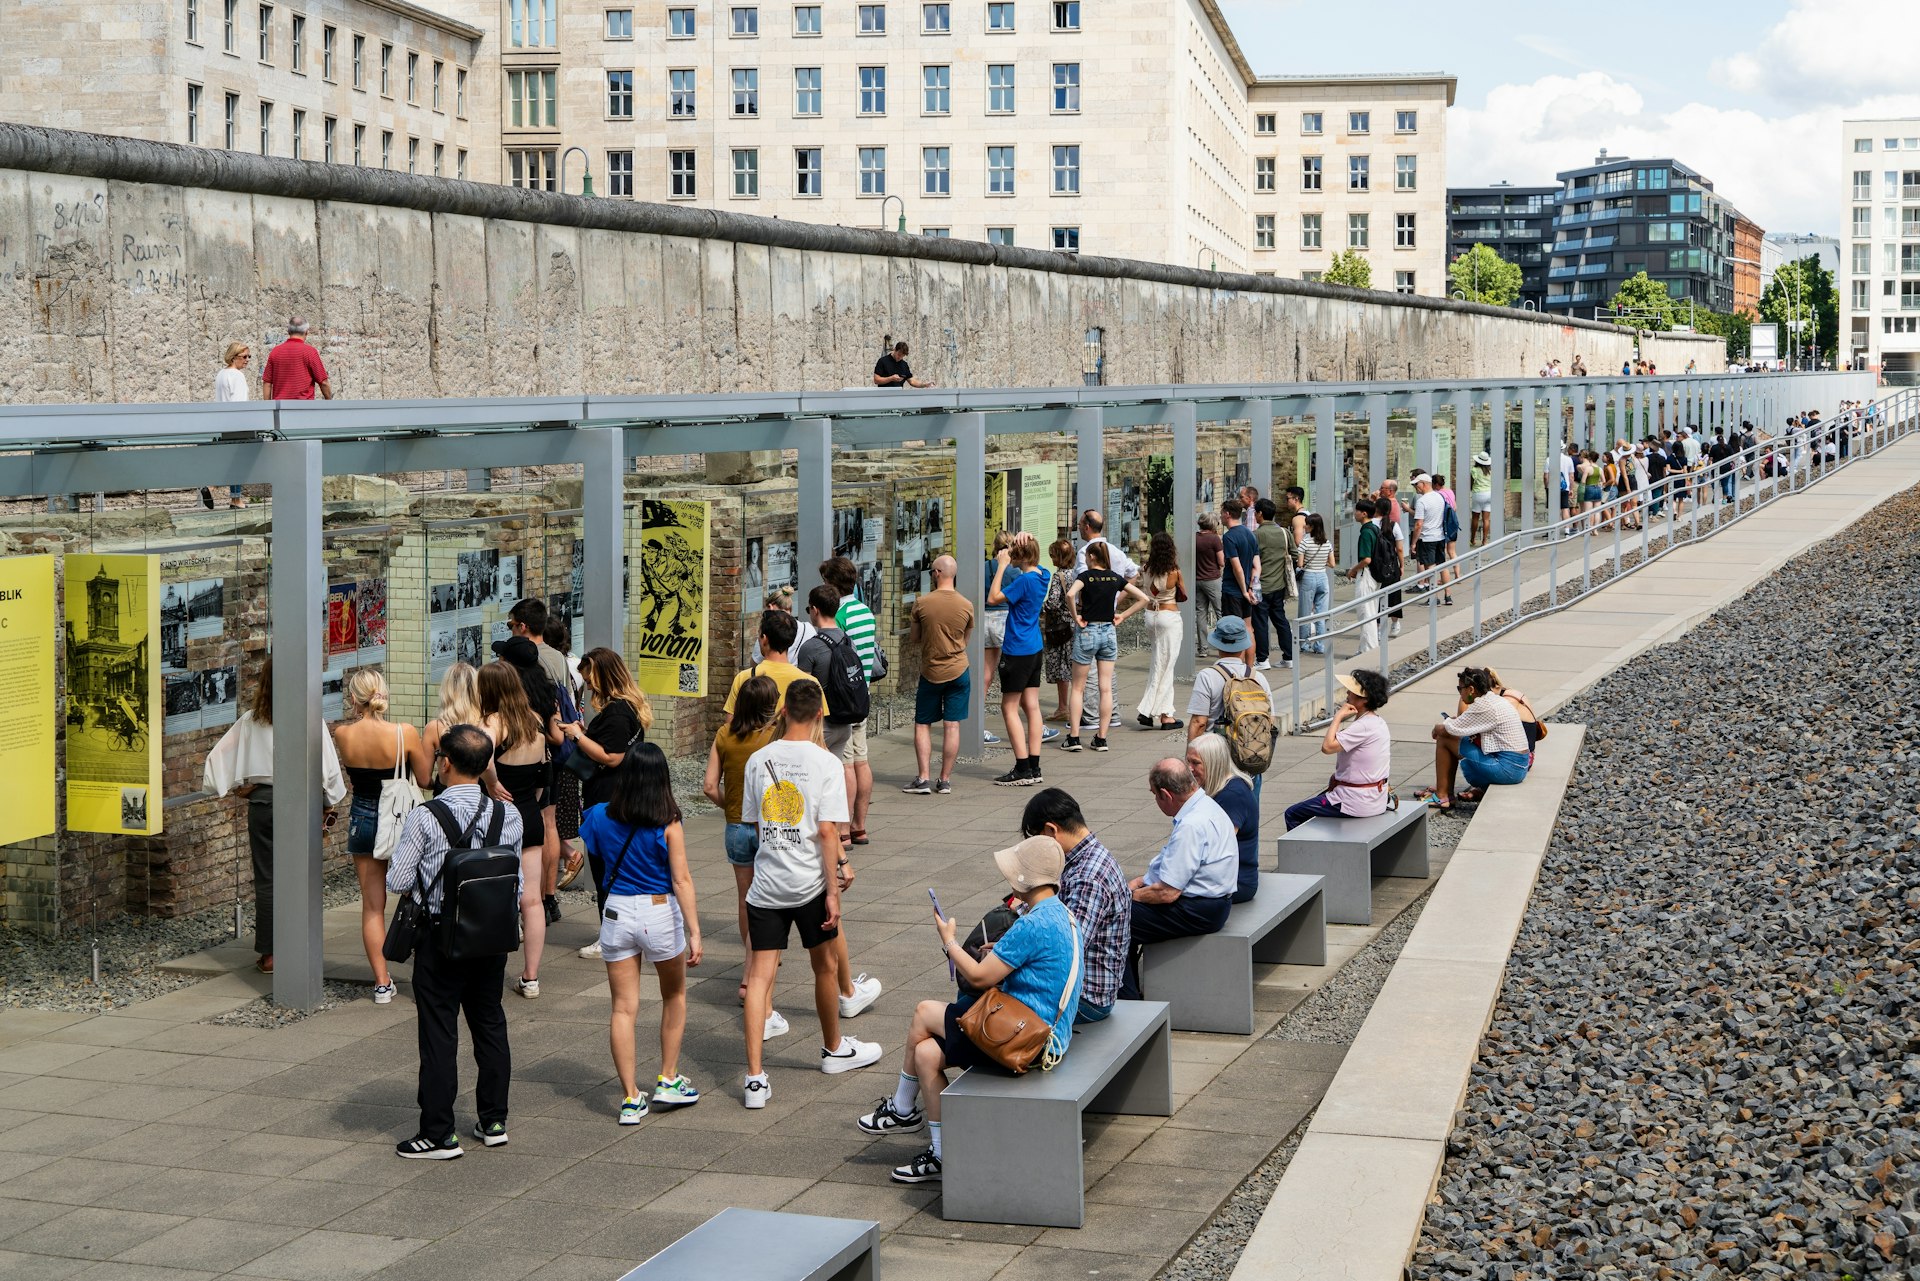 An overview of the outdoor part of the Topography of Terror